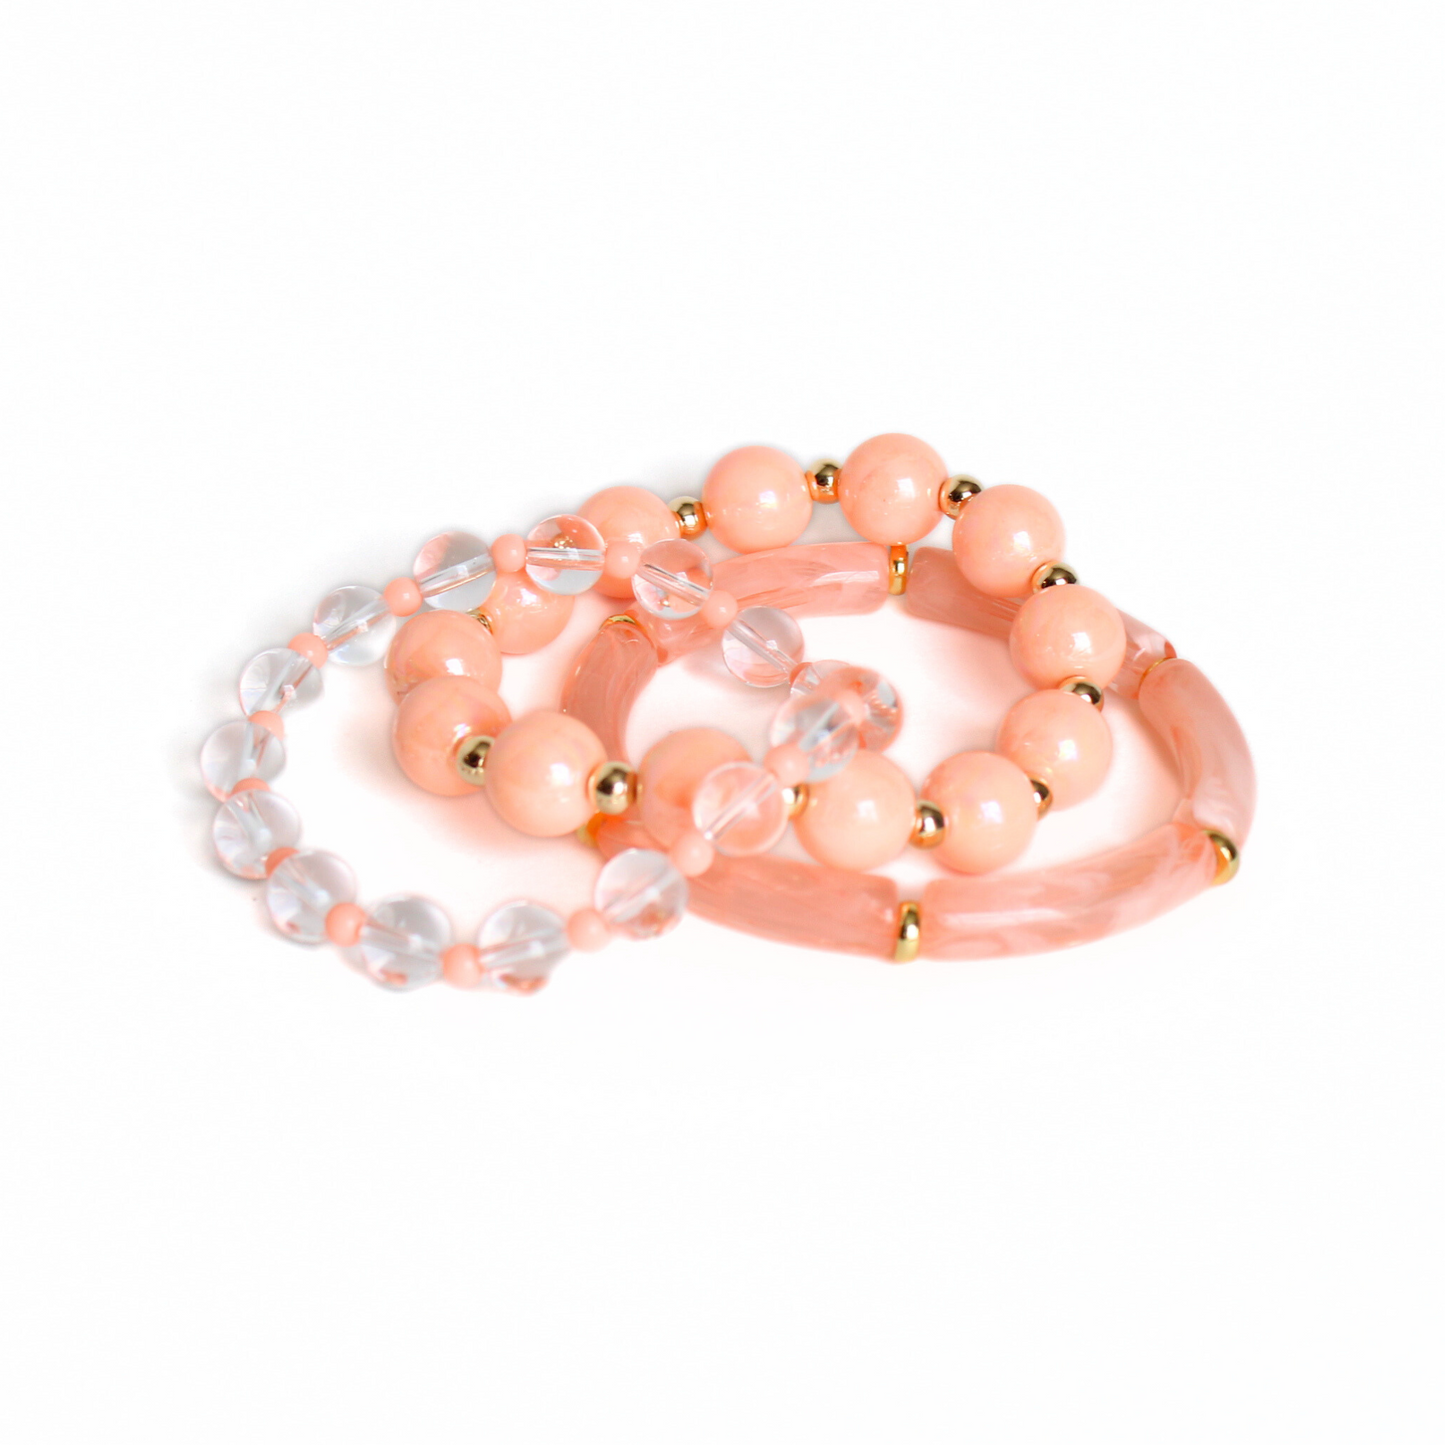 3-peice peach golden hour beach bracelet set. Designed with 8mm skinny acrylic bamboo tubes with alternating gold flats. Chunky 12mm peach iridedescent acrylic beads with alternating 5mm gold beads. 6mm clear quartz round beads with alternating 4mm peach acrylic beads.